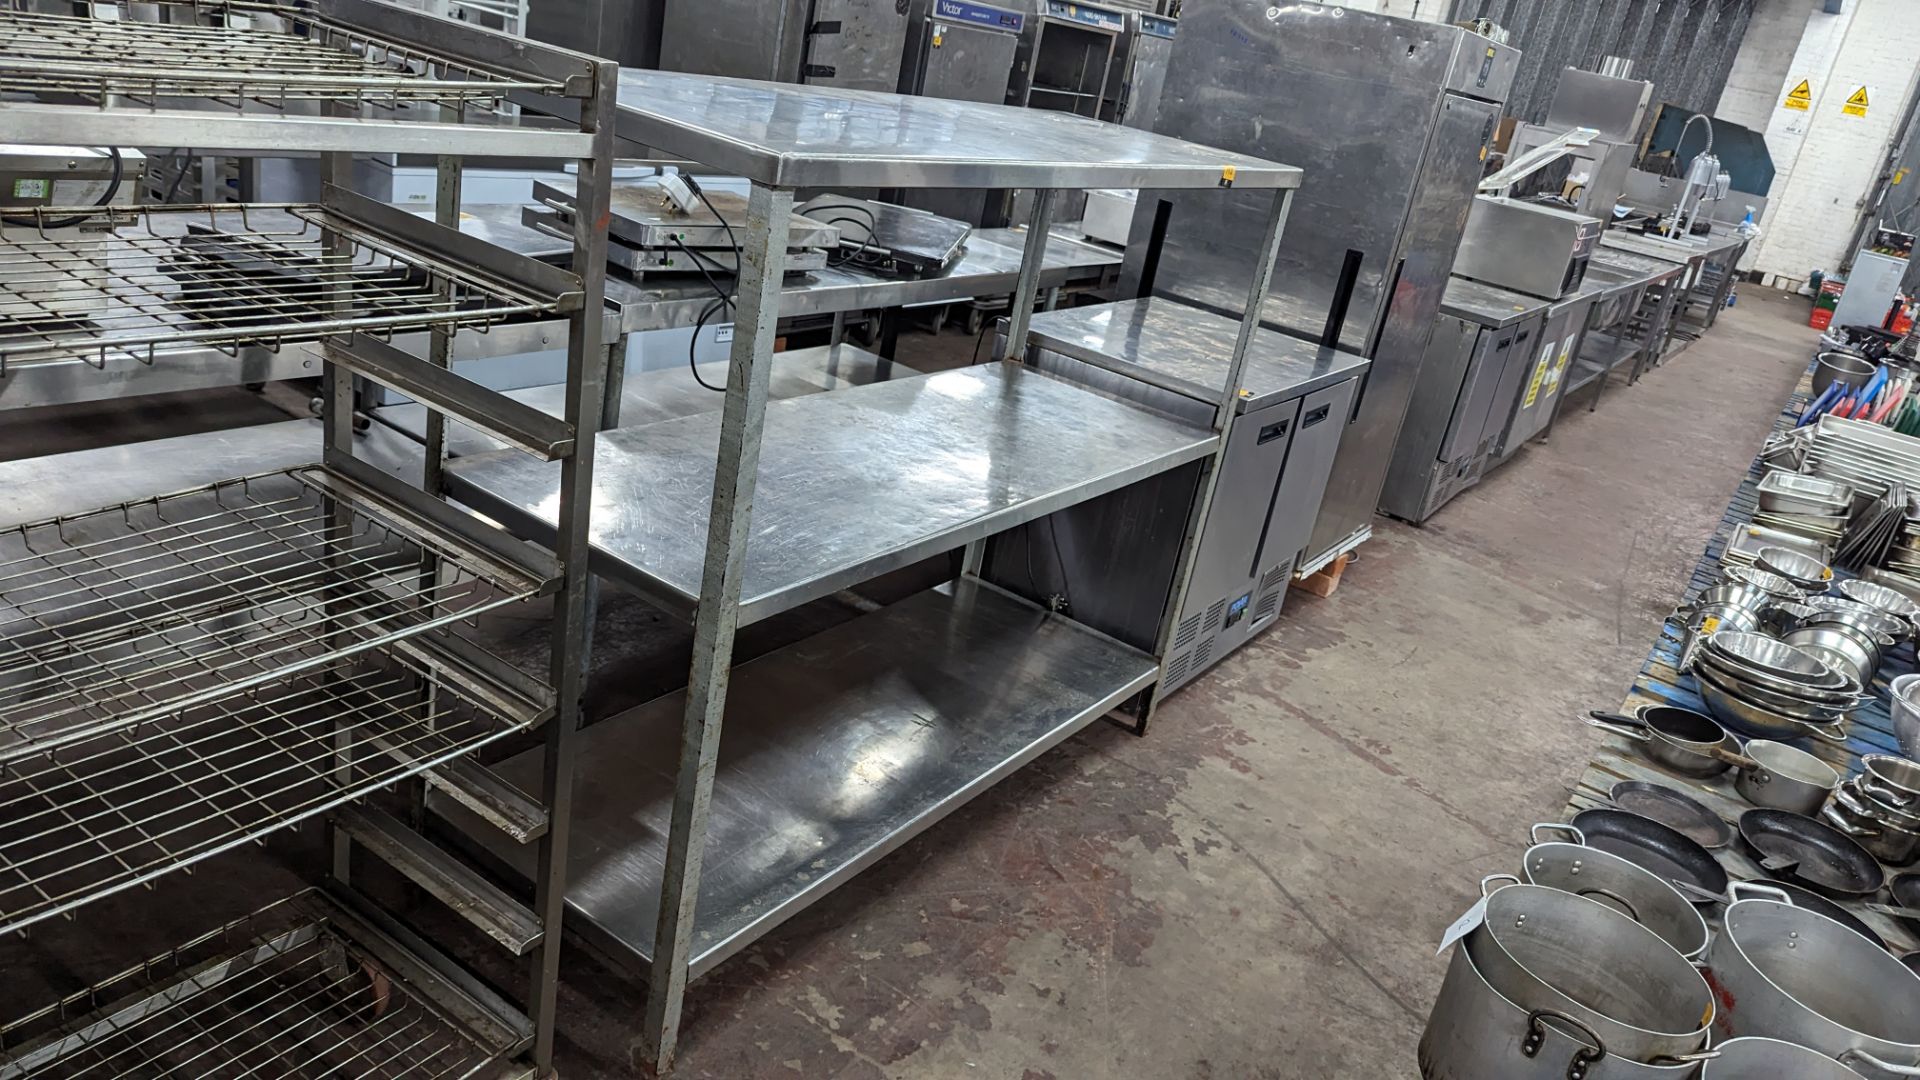 Shelving unit with 3 stainless steel shelves. Max dimensions approx. 1670mm x 630mm x 1400mm - Image 4 of 5